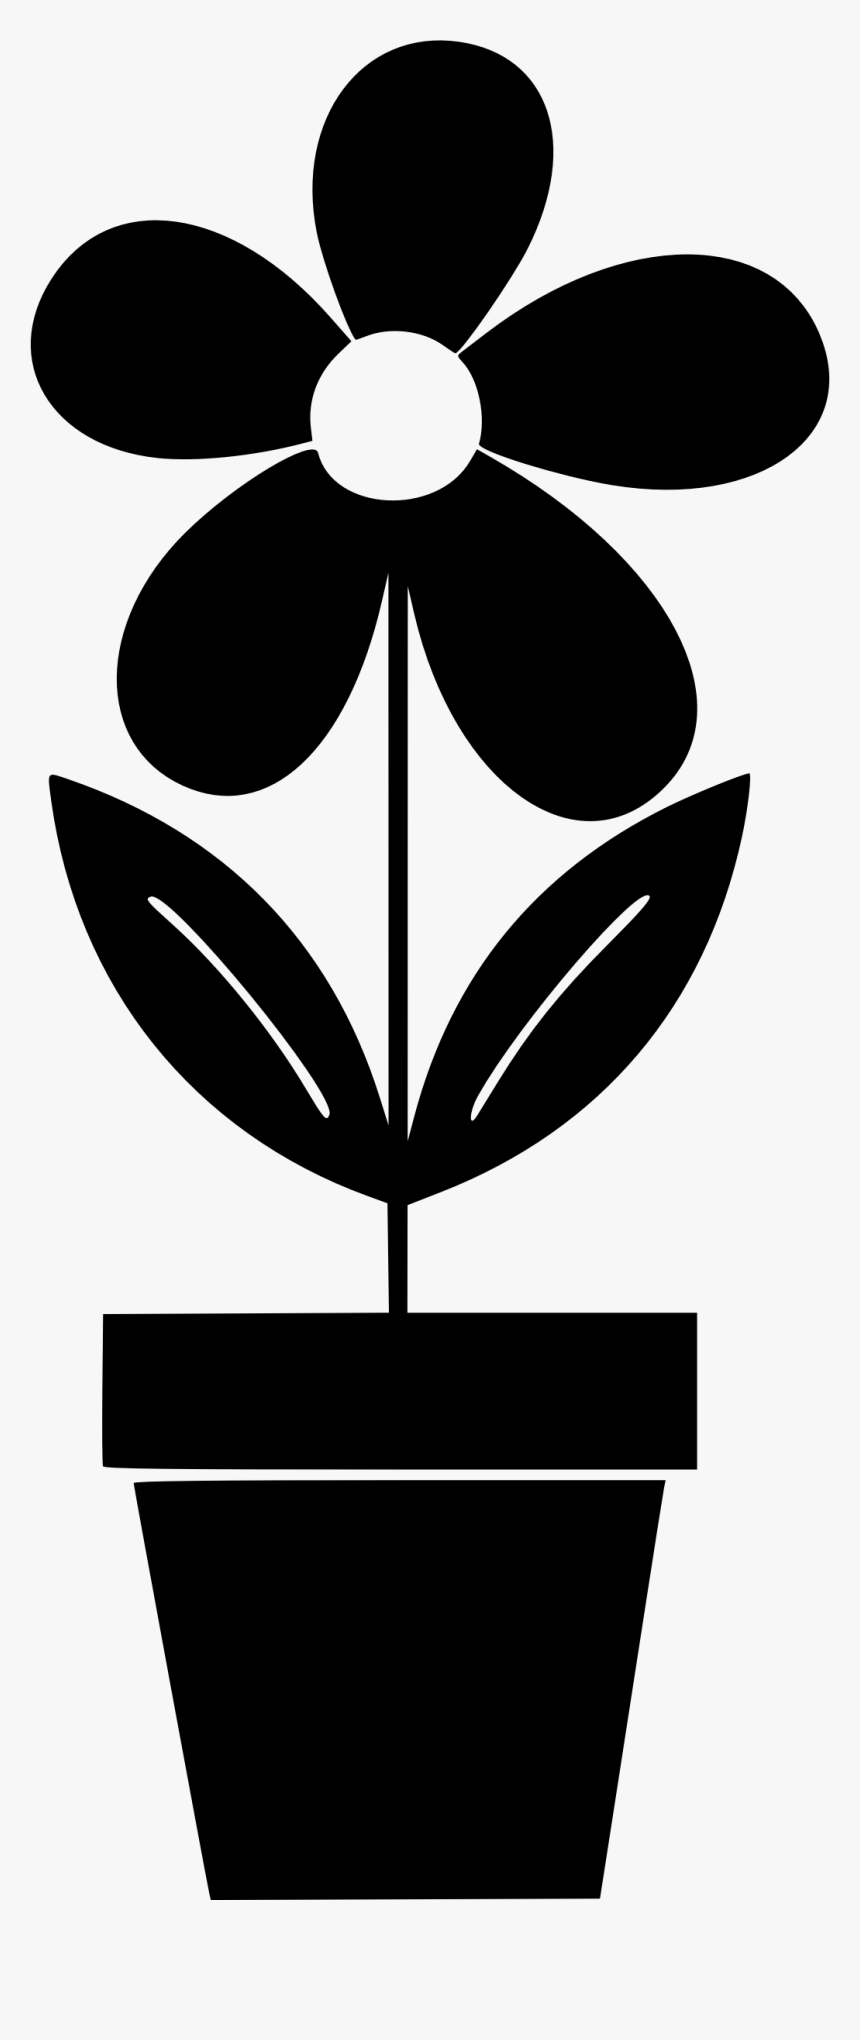 Potted Plant Clip Arts - Potted Plant Silhouette Clip Art, HD Png Download, Free Download